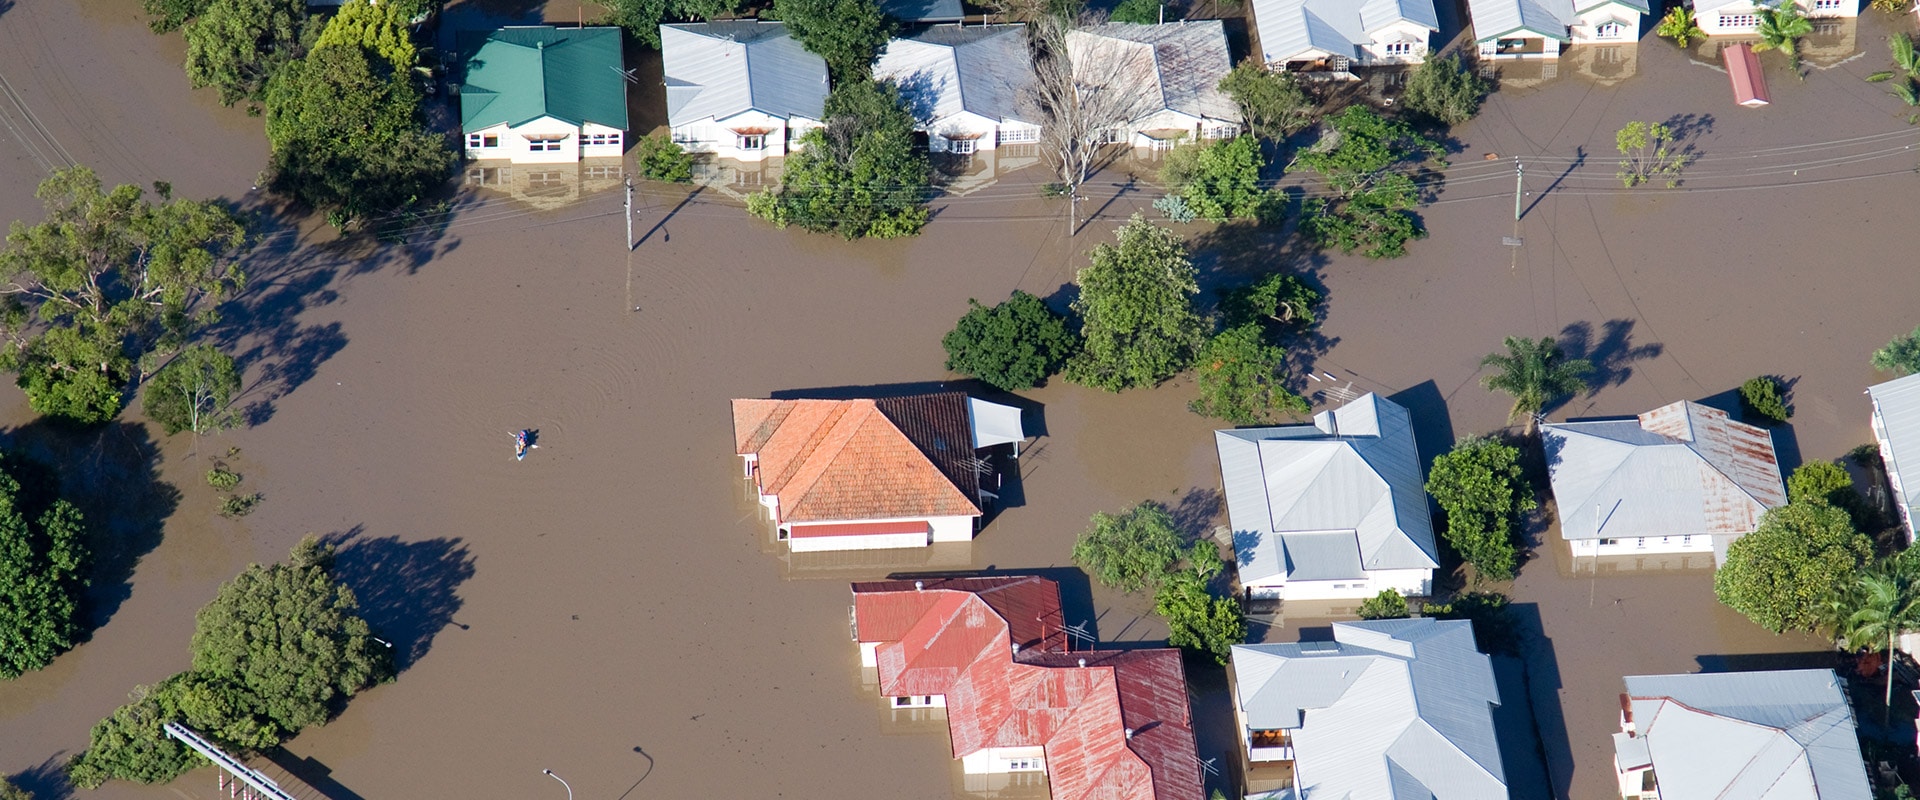 Bird's eye view looking down on New Zealand houses that have been flooded by storm damage.